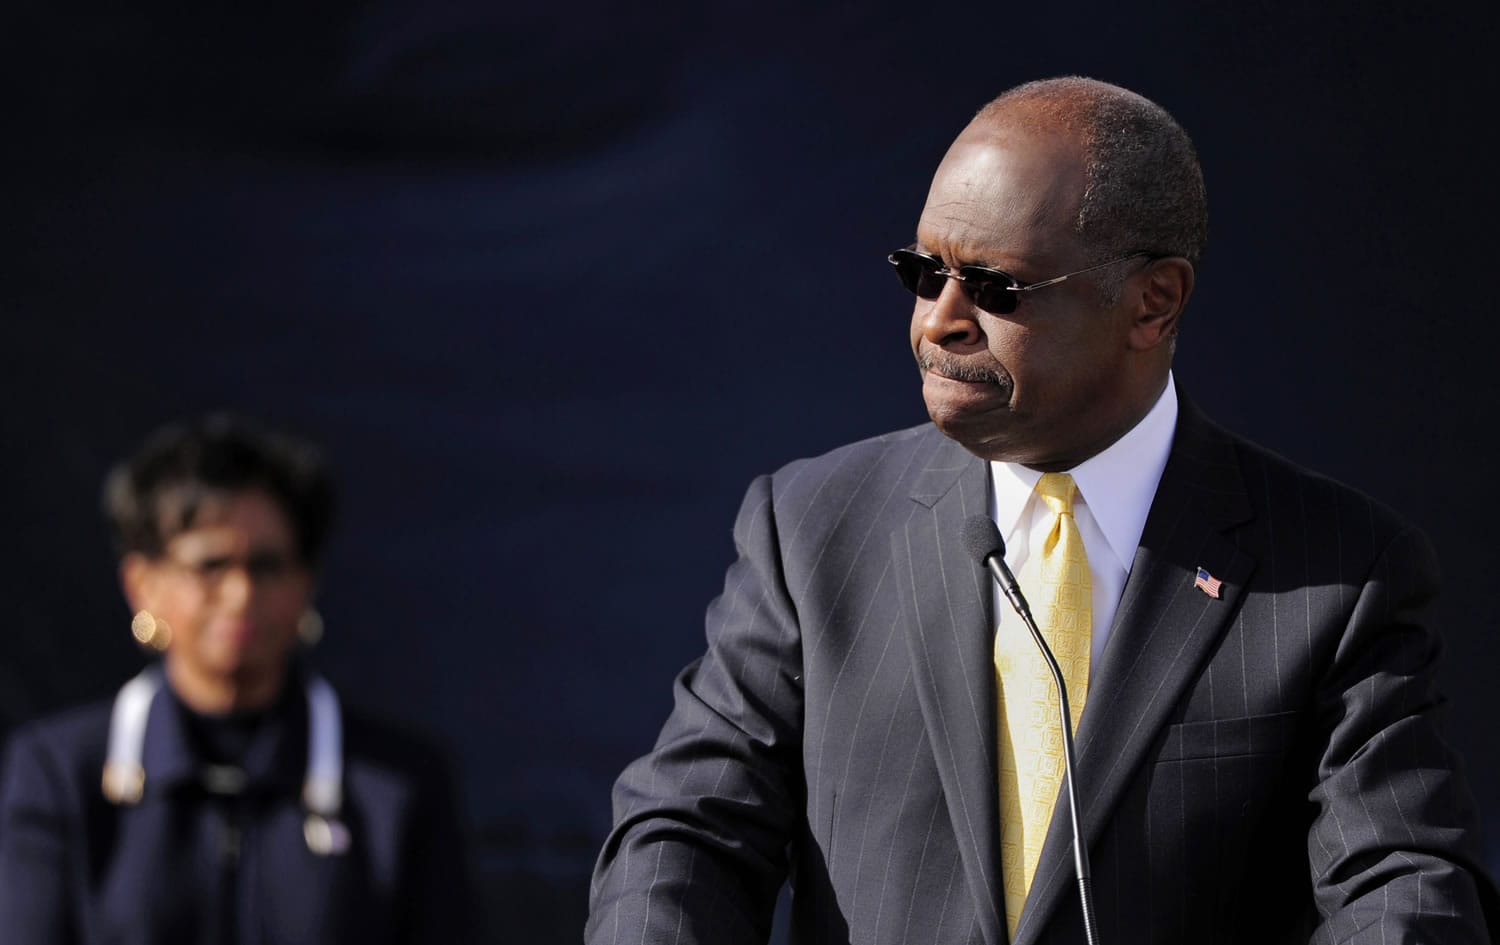 Herman Cain
Condemned reports of sexual improprieties